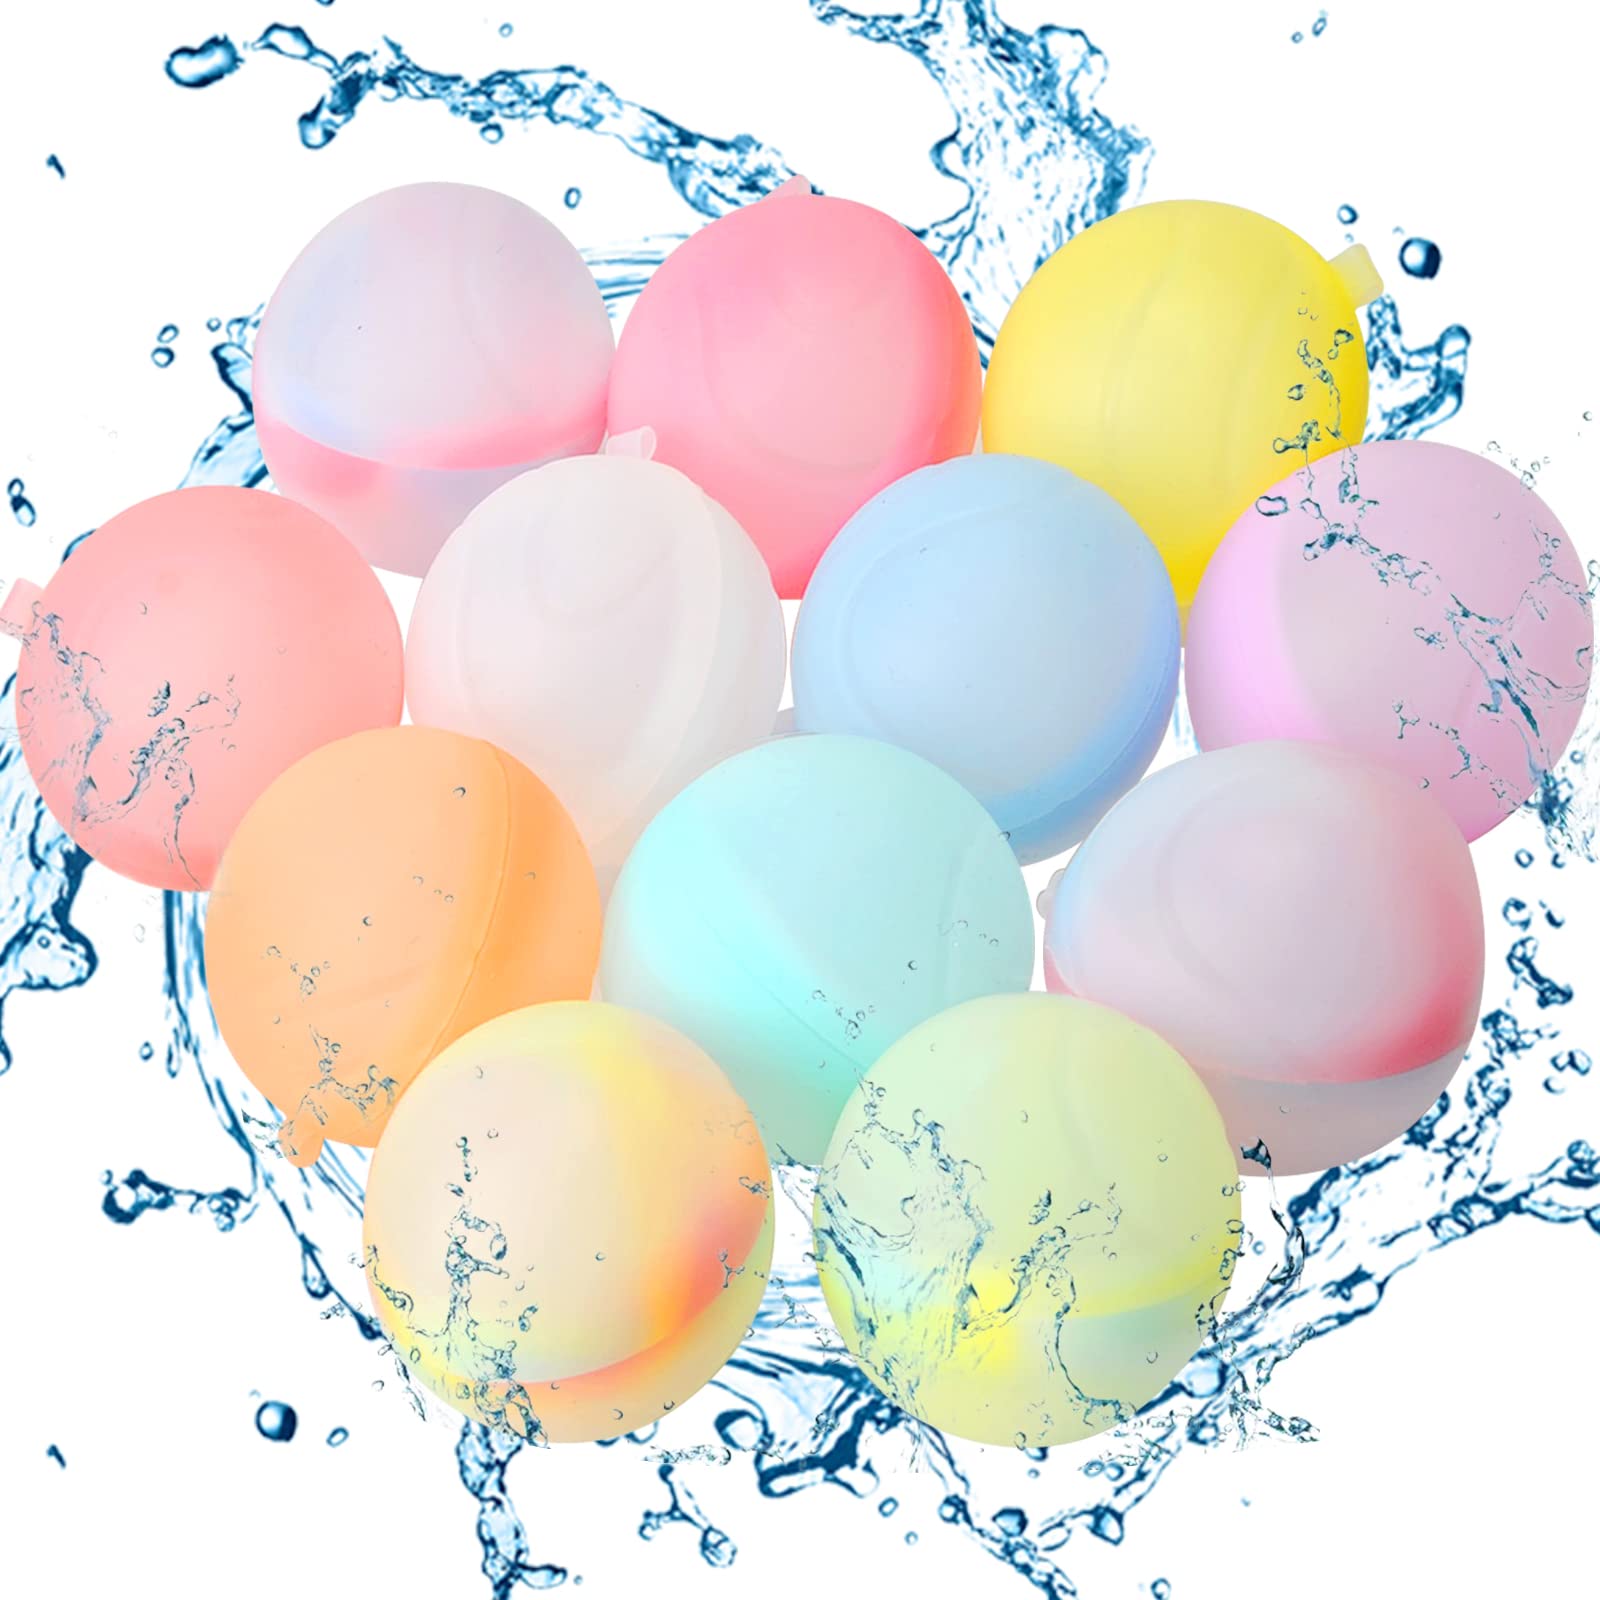 FEBALHS 12pcs Reusable Water Balloons, Summer Outdoor Silicone Pool Beach Water Toys for Kids 4-8-12, Outside Water Bomb Ball Games Refillable Fun Party Gift for Boys and Girls